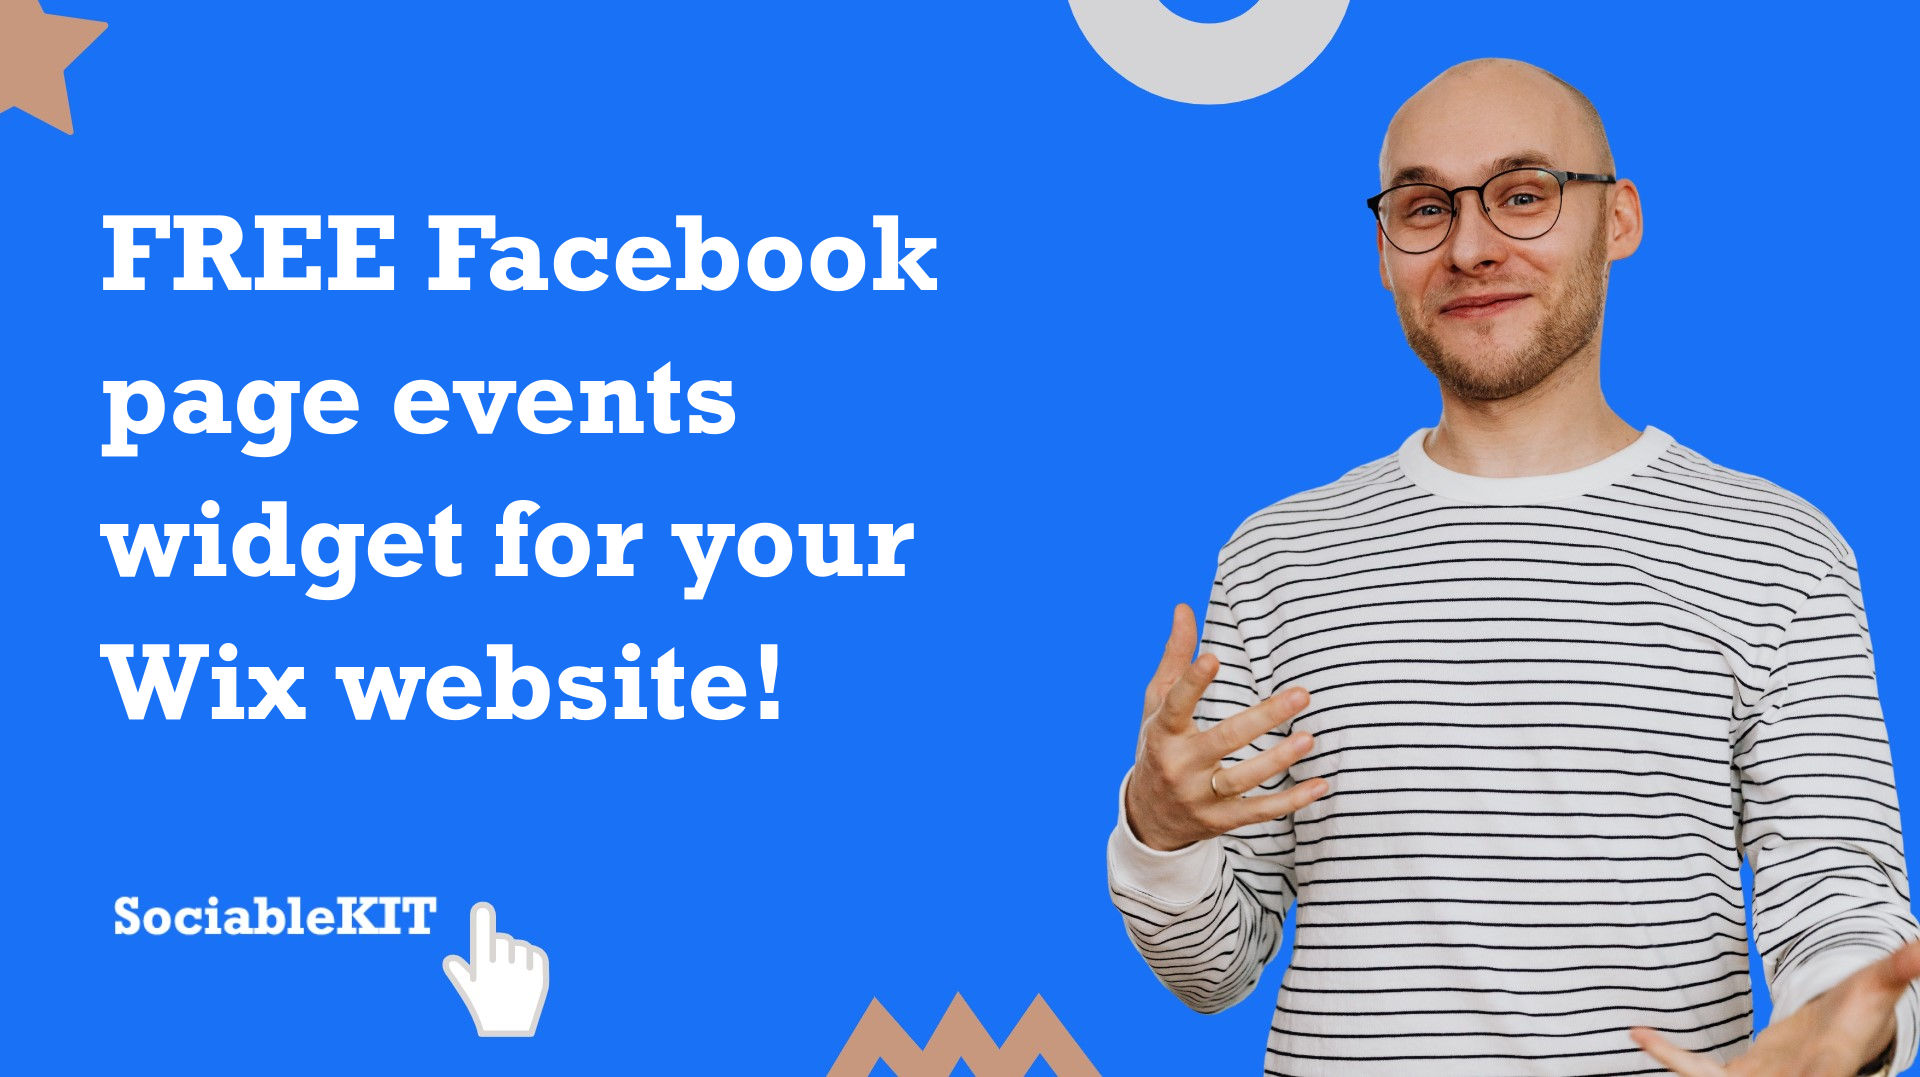 Free Facebook page events widget for your Wix website